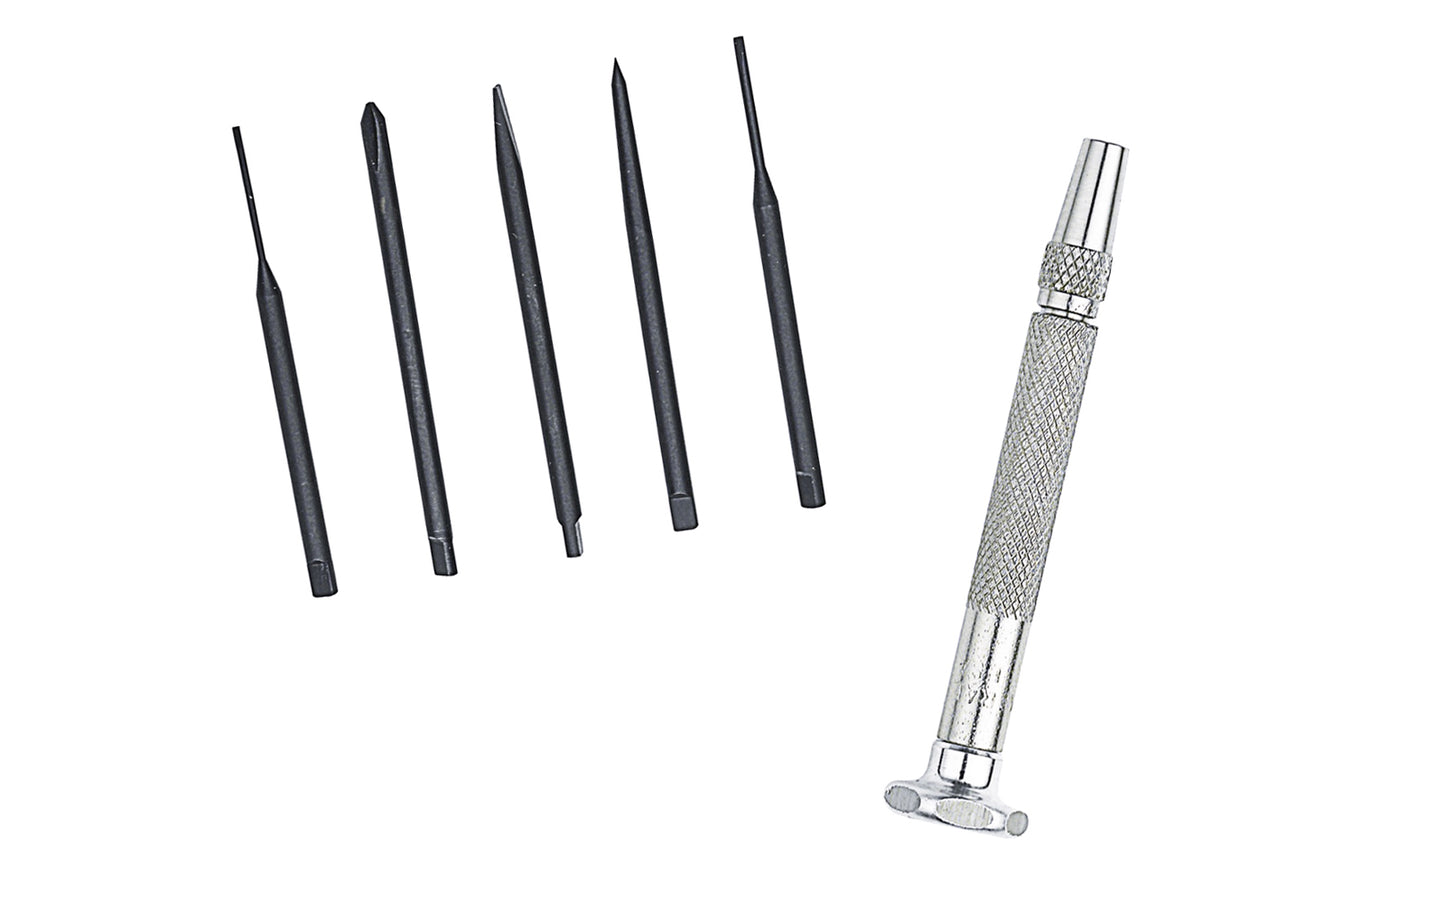 5-Blade Jeweler's Screwdriver / Awl Set ~ Model No. SPC606 ~ Five-blade Jeweler's Screwdriver/Awl Set is ideal for hobbyists doing close, delicate work. Slotted blade widths: 0.1", 0.07", 0.04", Crosspoint blade size: #0 ~ swivel heads for greater control ~ Blades are made of black oxide-coated, tempered steel ~ General Tools